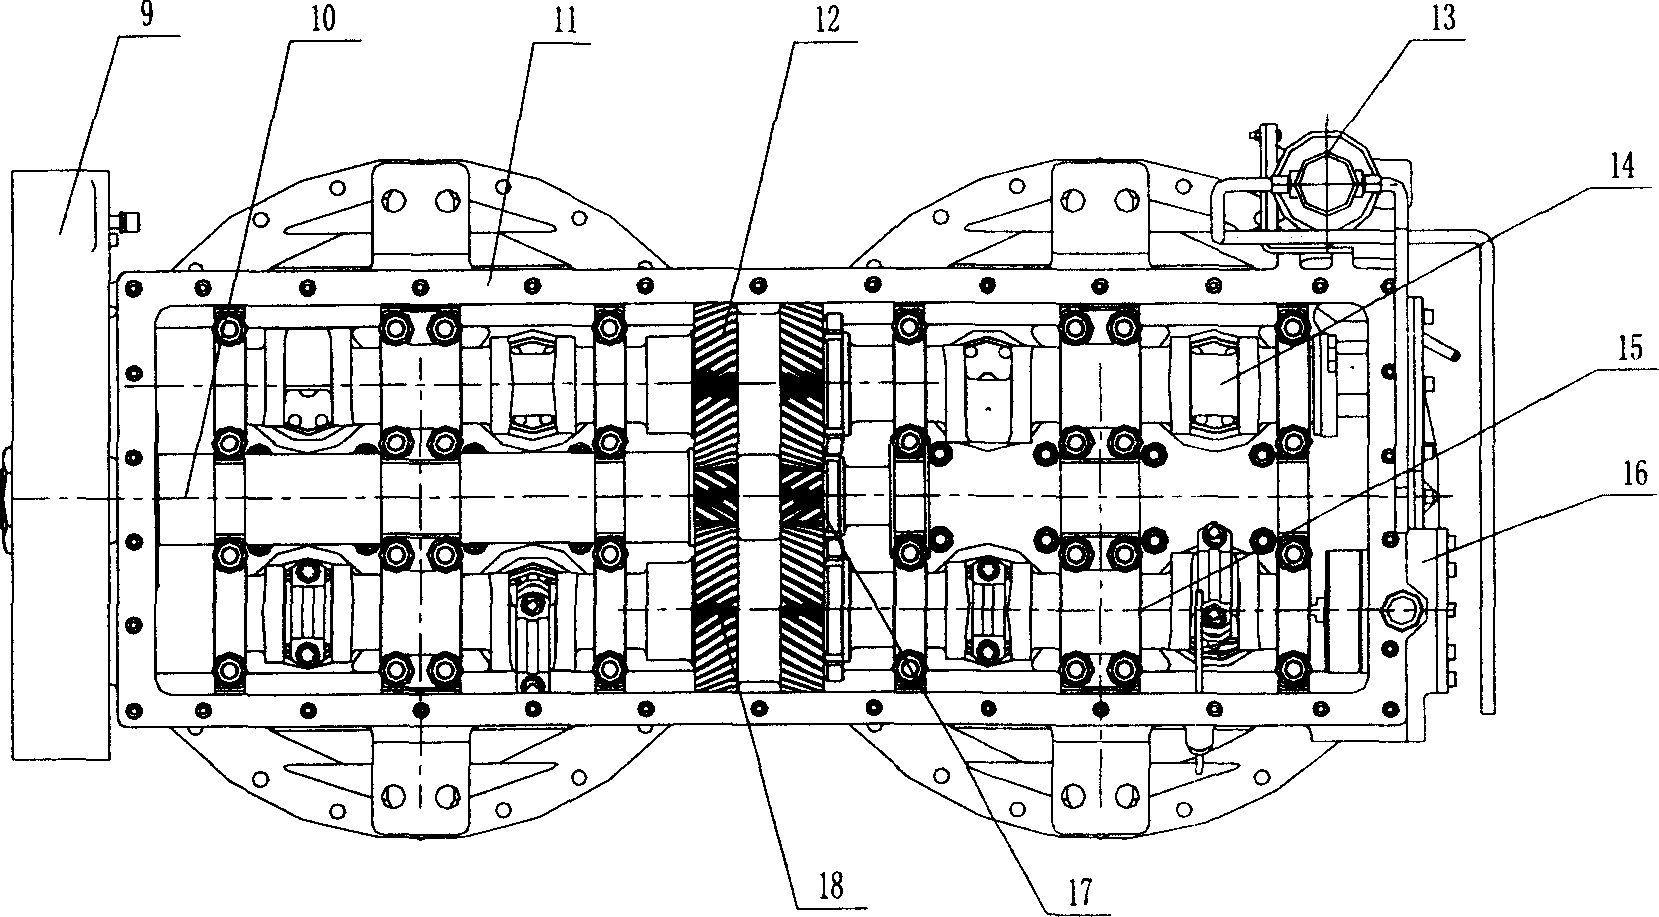 Drive system of 8-cylinder hot-air engine